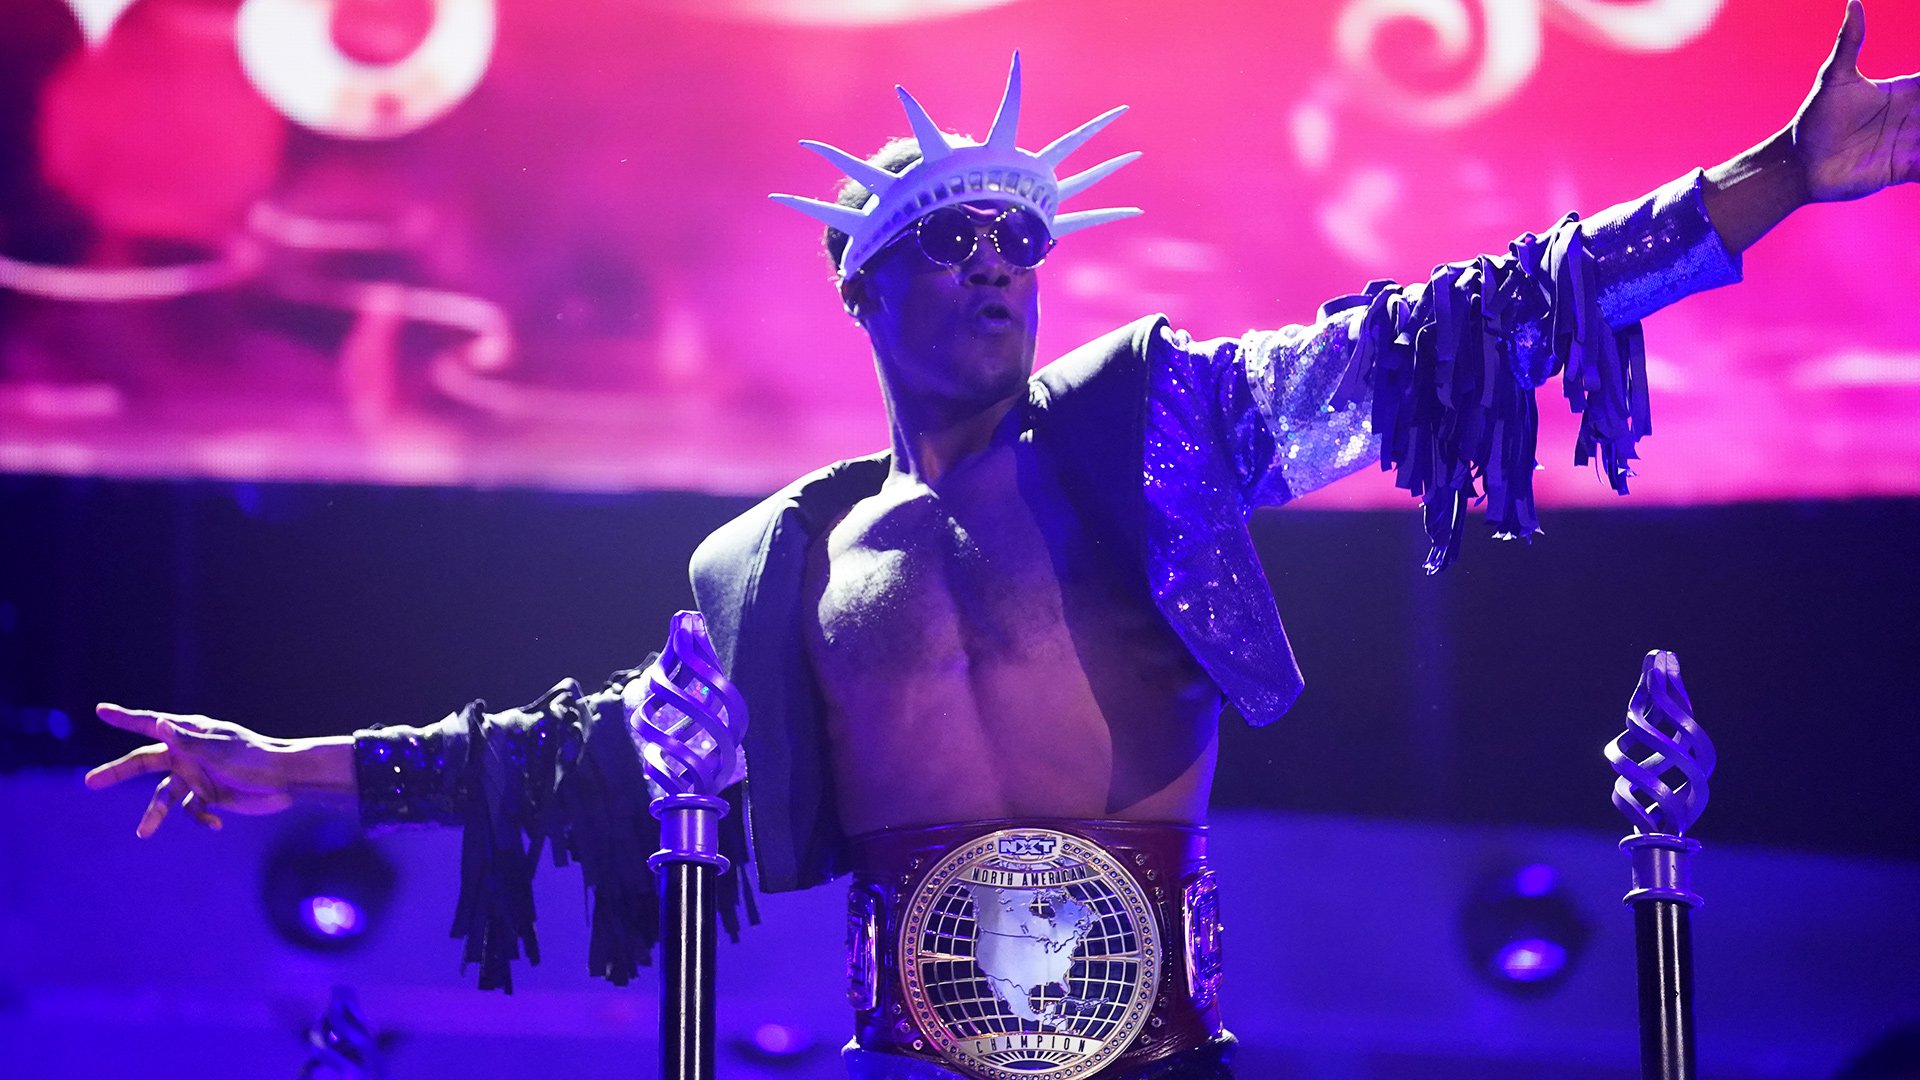 Velveteen Dream Makes An All American Entrance Nxt Takeover New